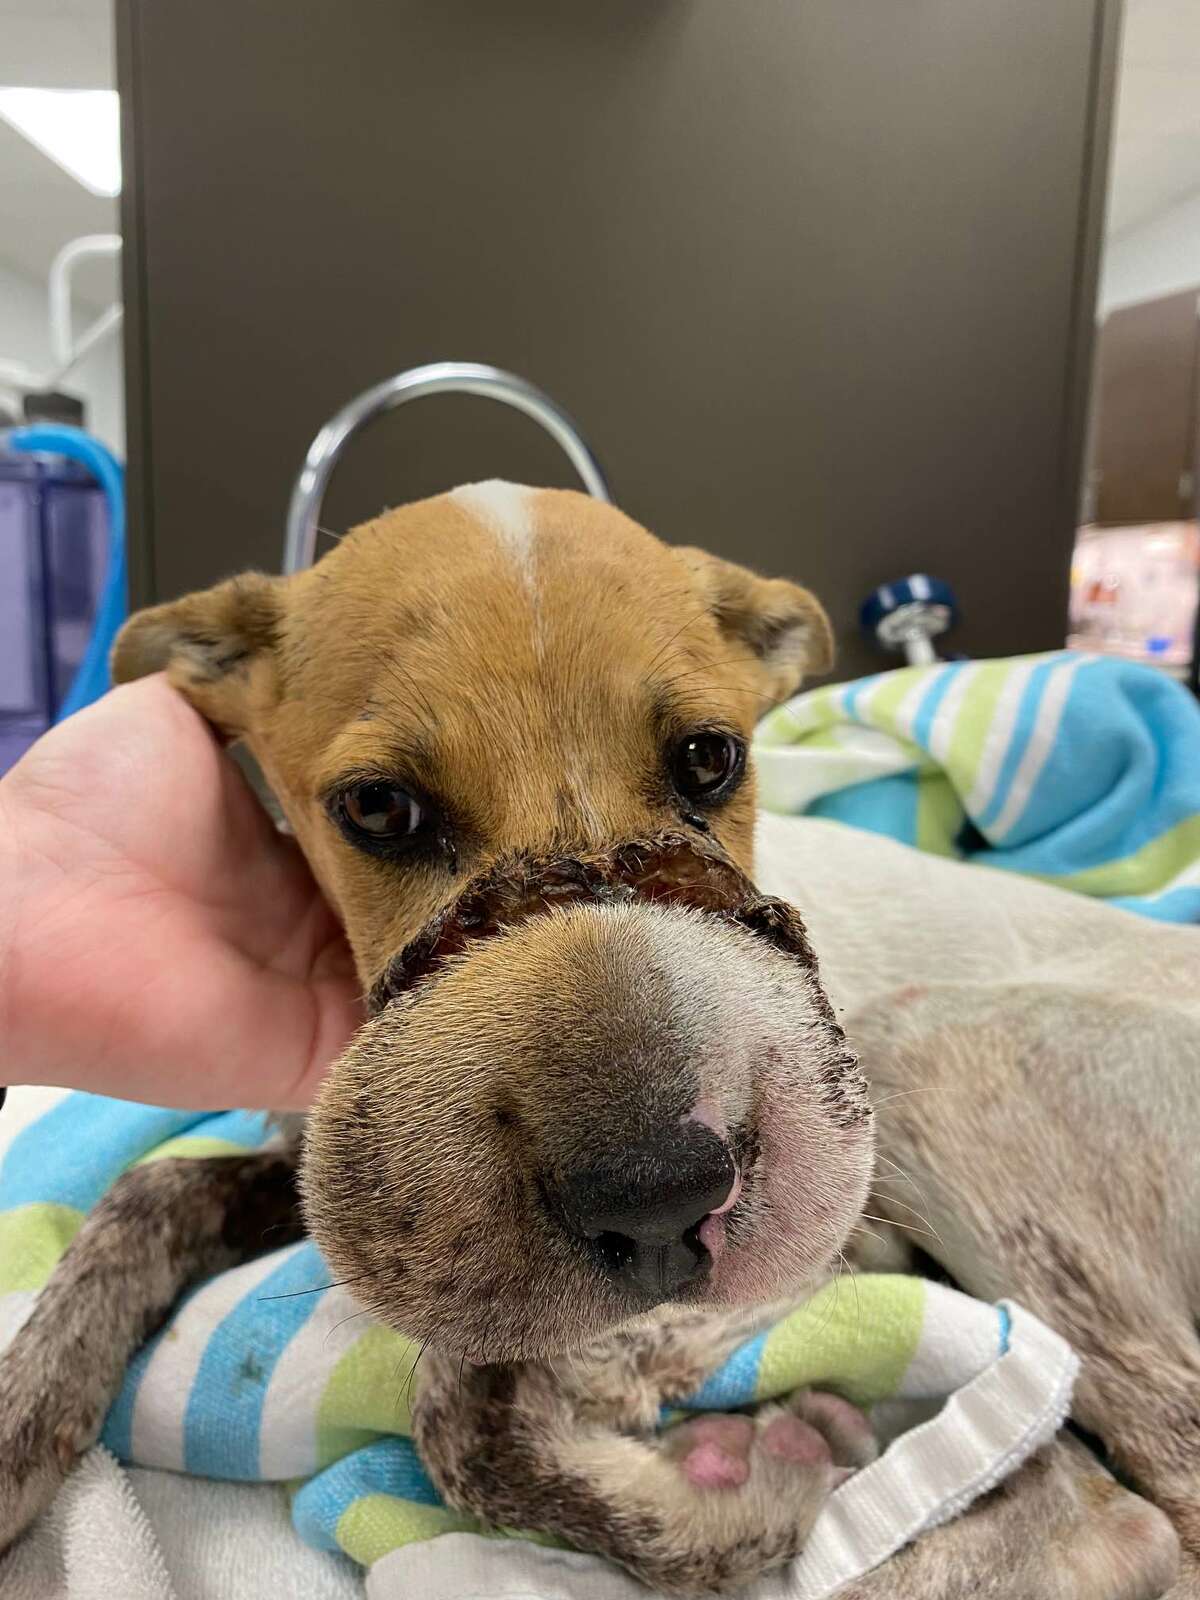 Sharky, a chihuahua mix, was found last week with its snout tied shut. The elastic hair band cut the dog's face down to the bone. The dog underwent surgery at the Houston SPCA on Tuesday, Oct. 25, 2022 and is now recovering, officials said.